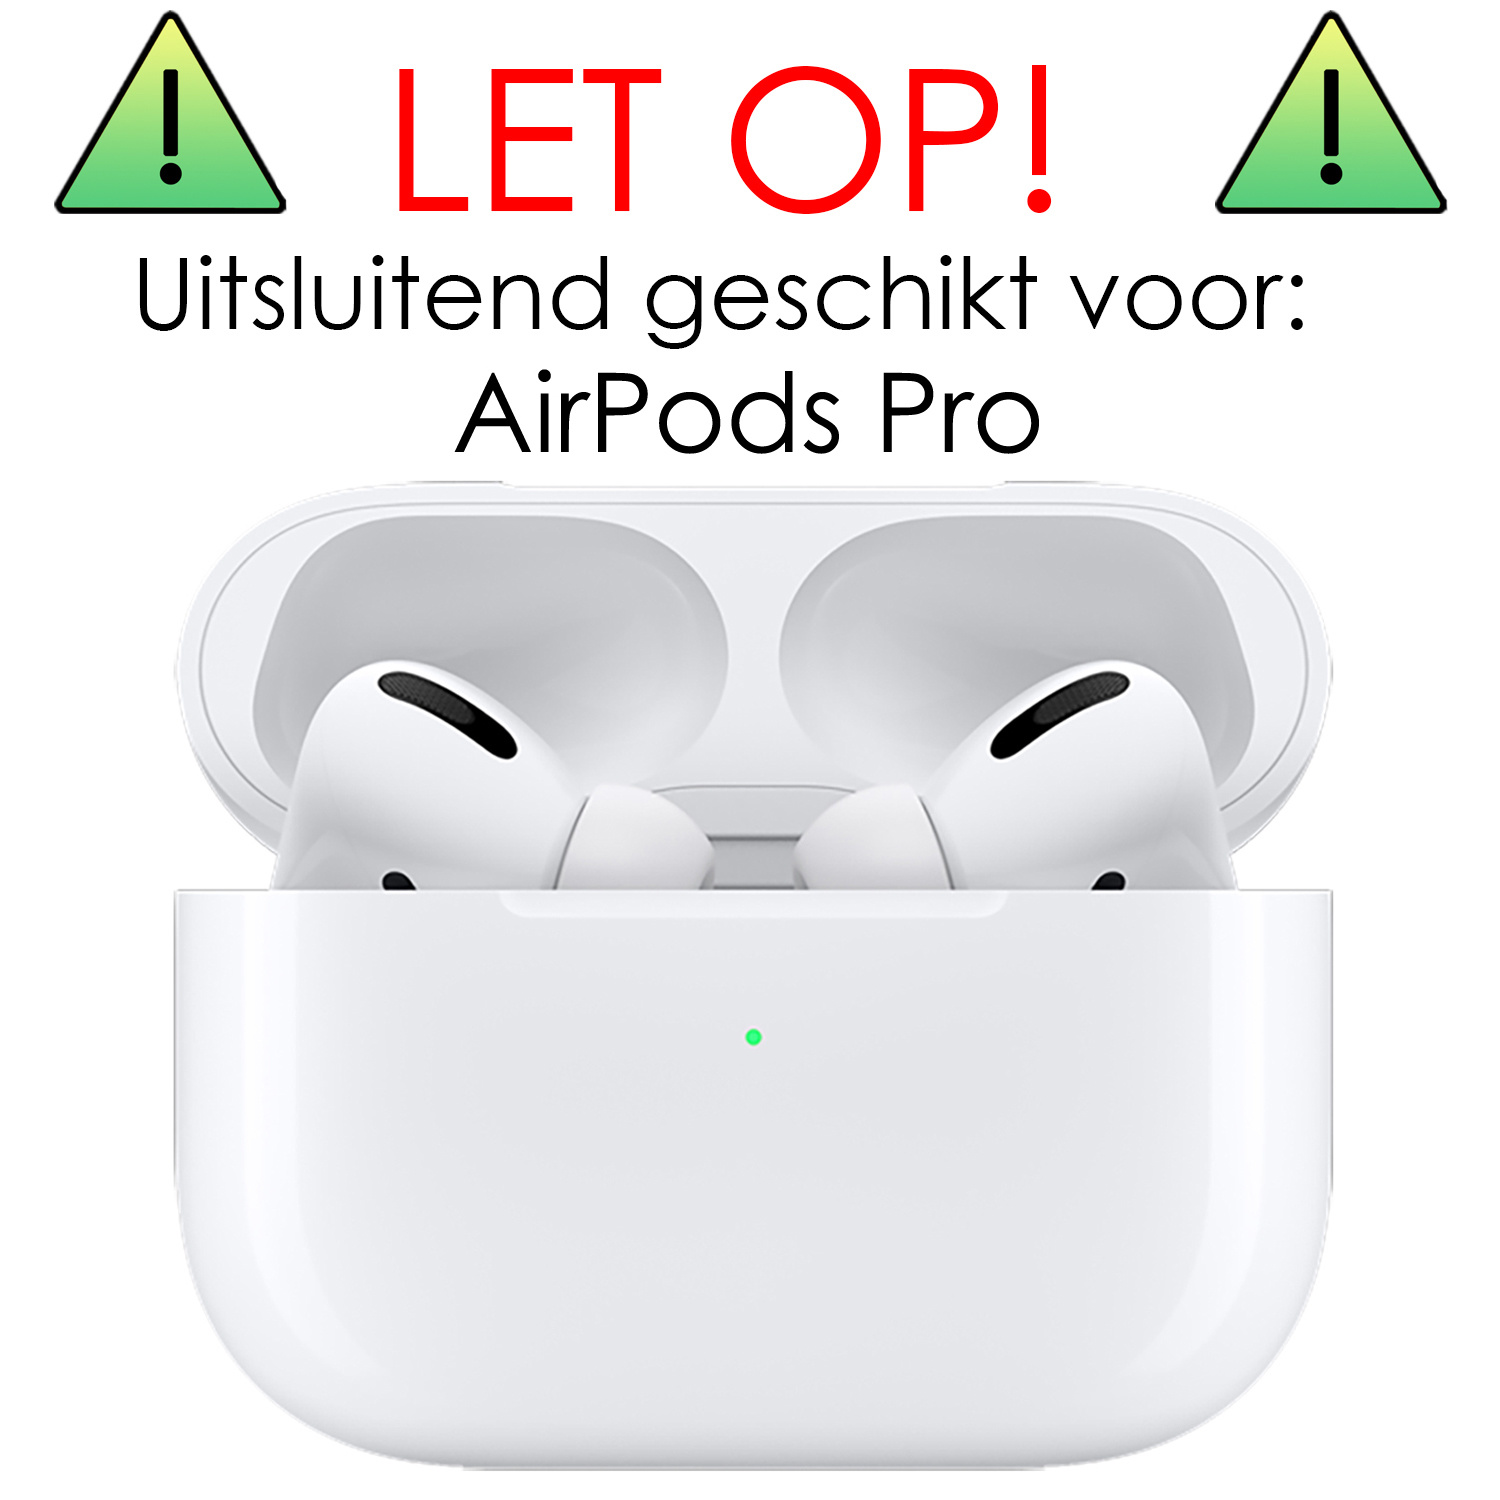 NoXx Hoes Geschikt voor Airpods Pro Hoesje Cover Silicone Case Hoes - Transparant - 2x